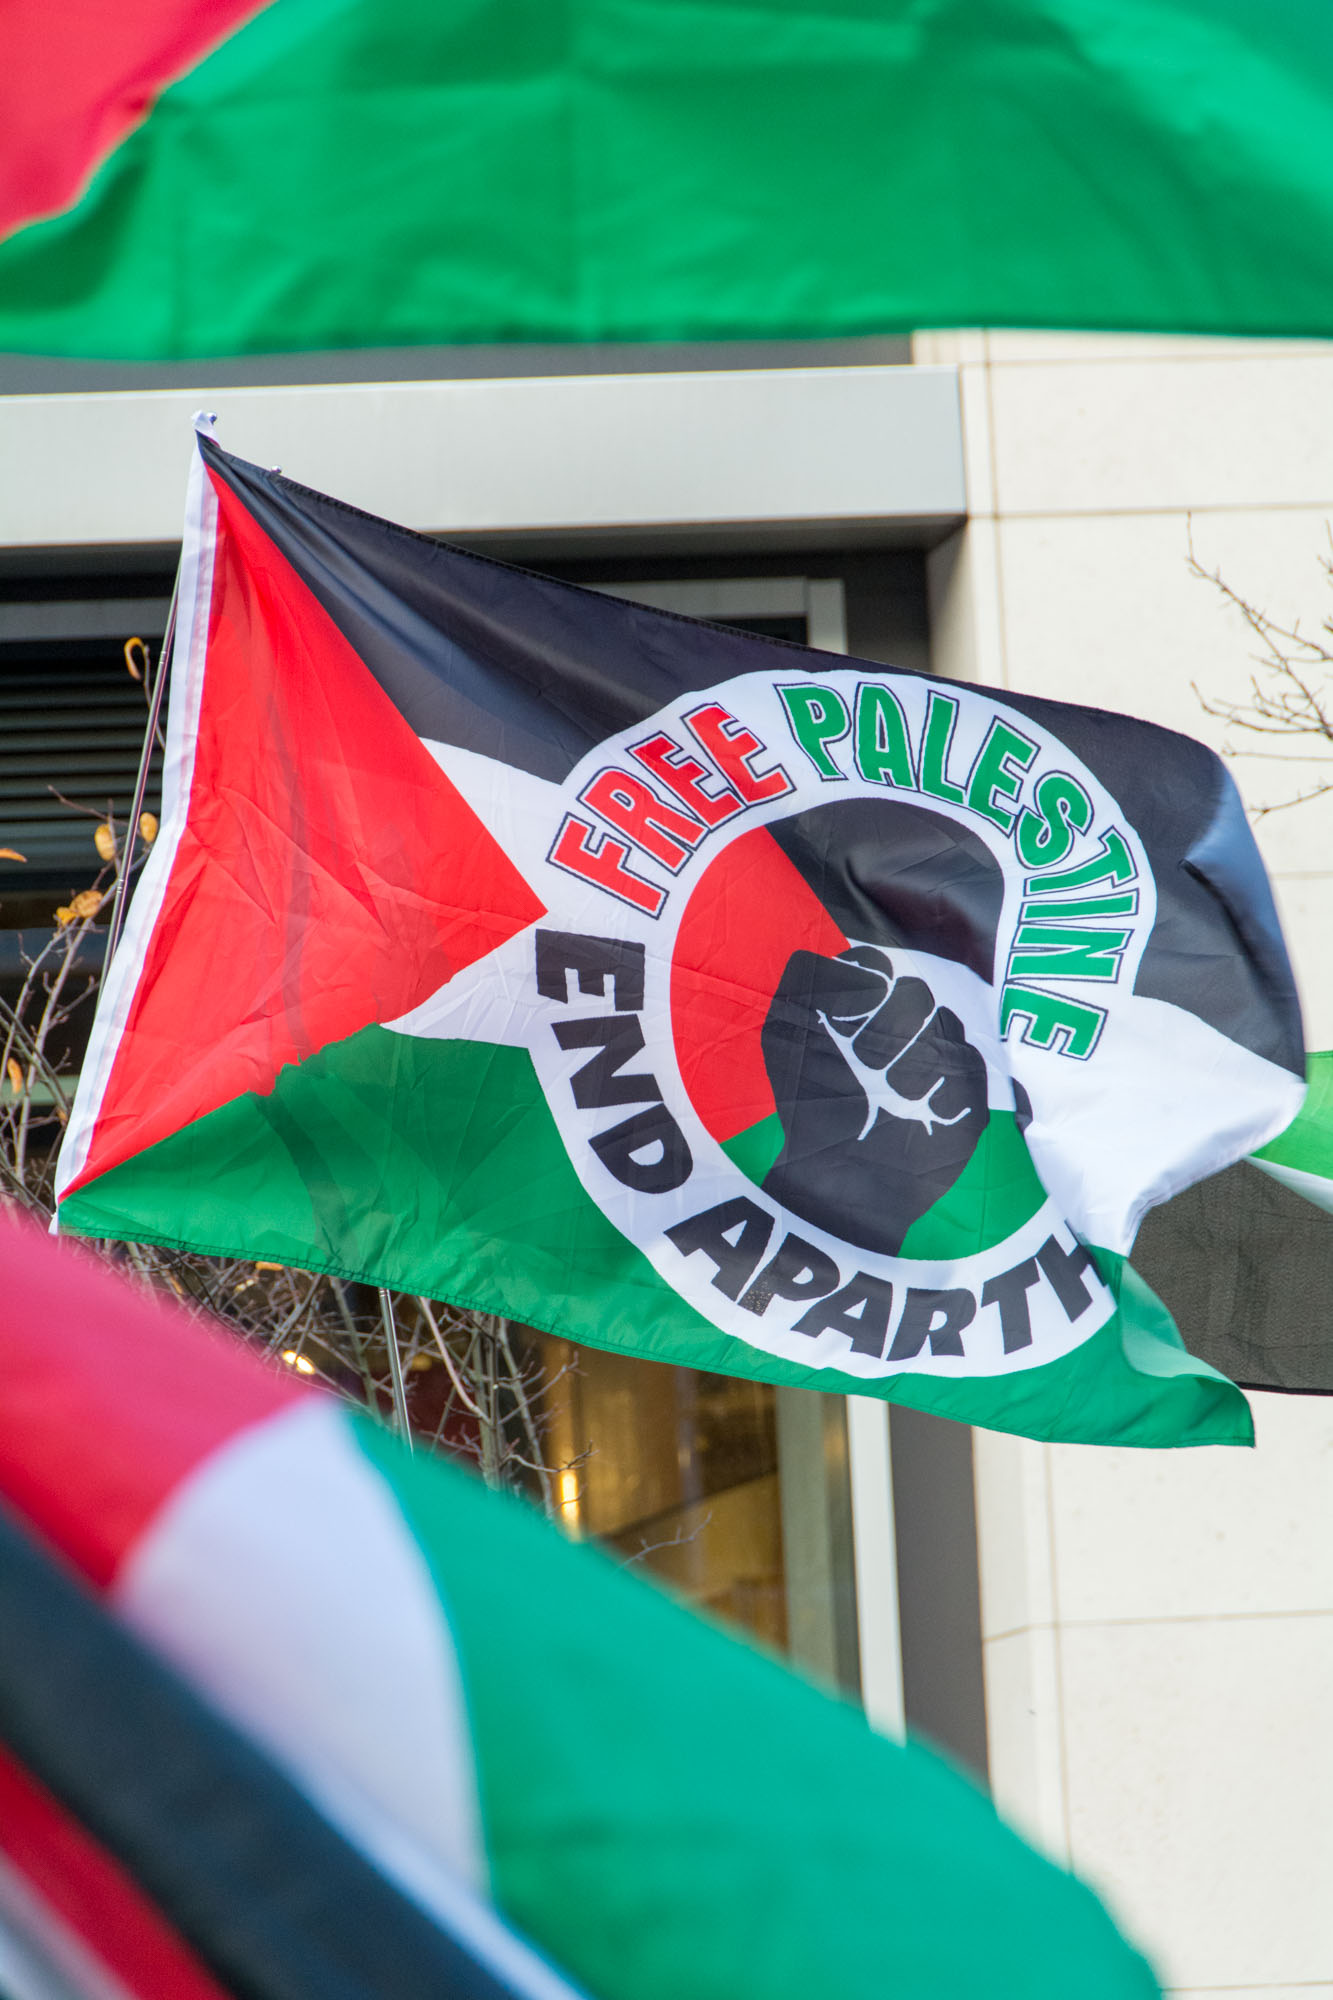 Free Palestine End Apartheid flag photographed at the Palestine march in Belfast. Photo 7740 by Stephen S T Bradley